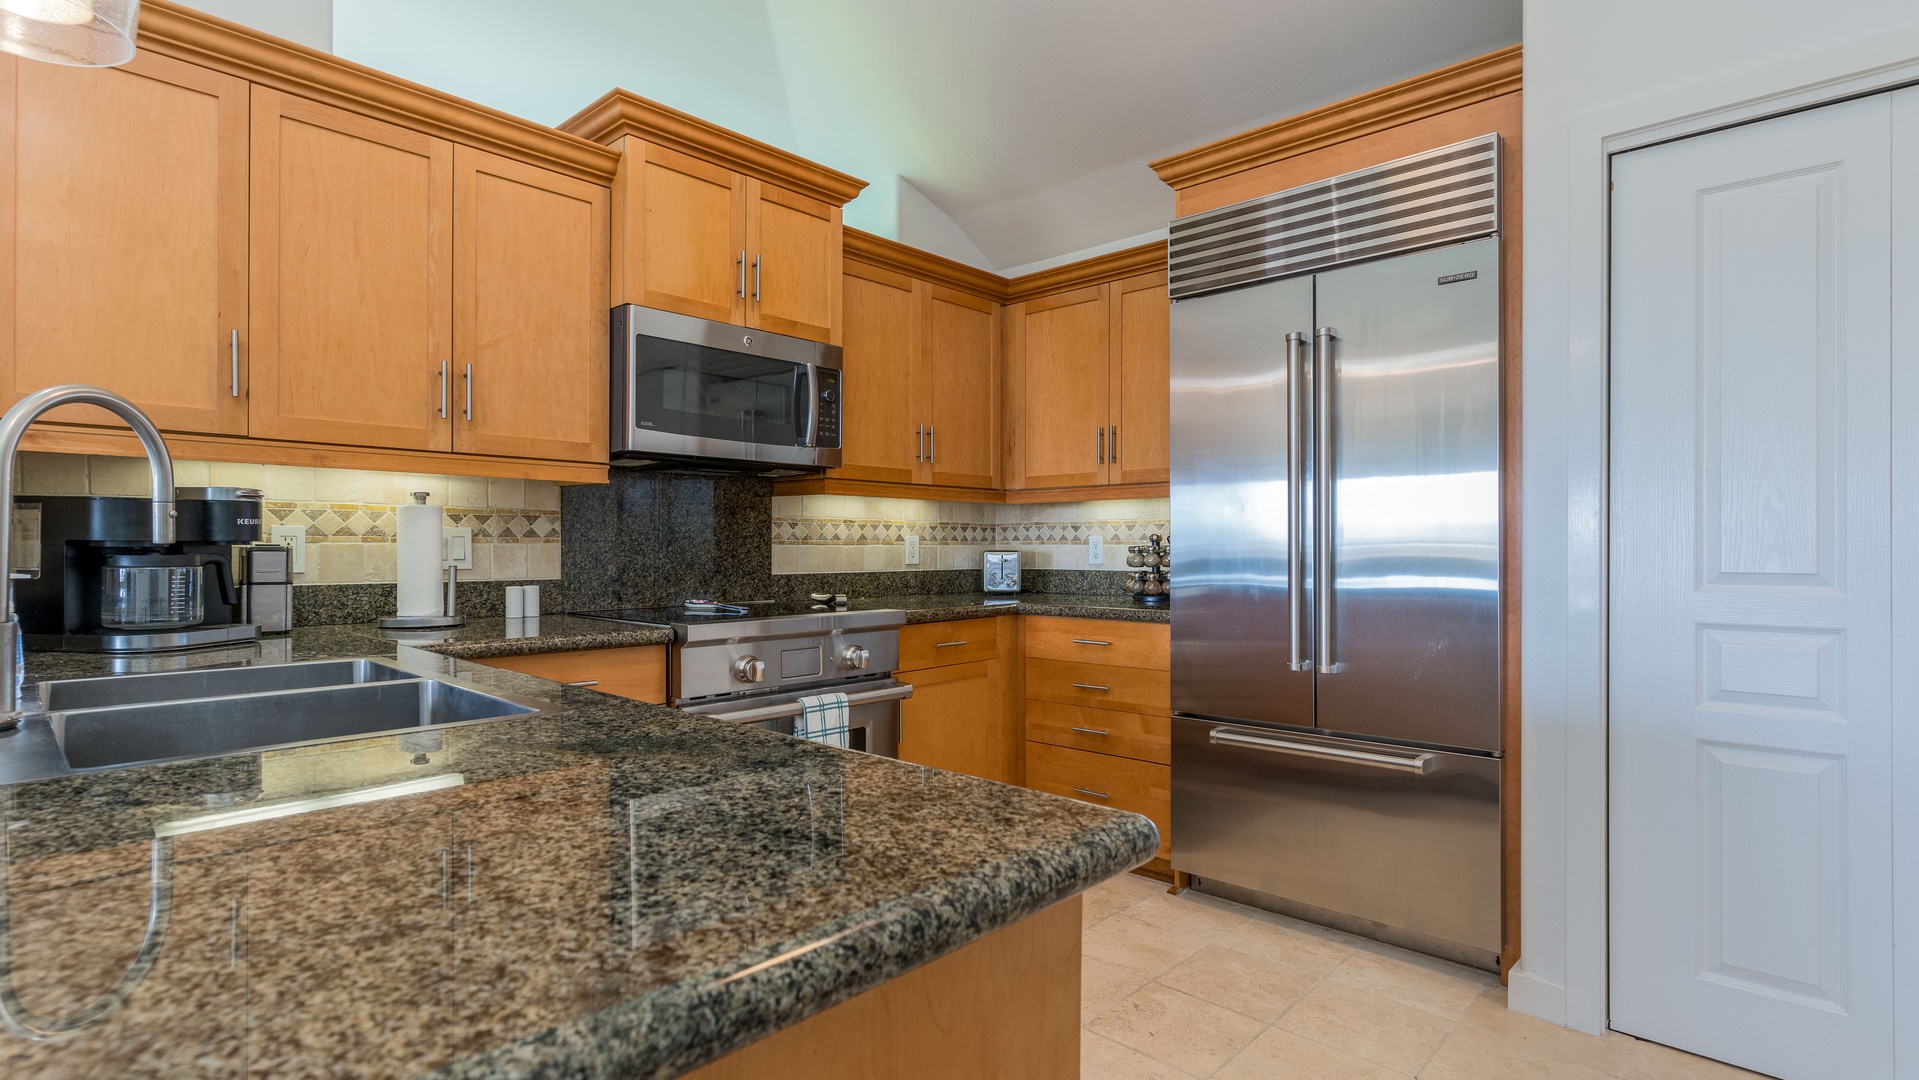 Kapolei Vacation Rentals, Kai Lani 21C - The kitchen features stainless steel appliances and high ceilings.